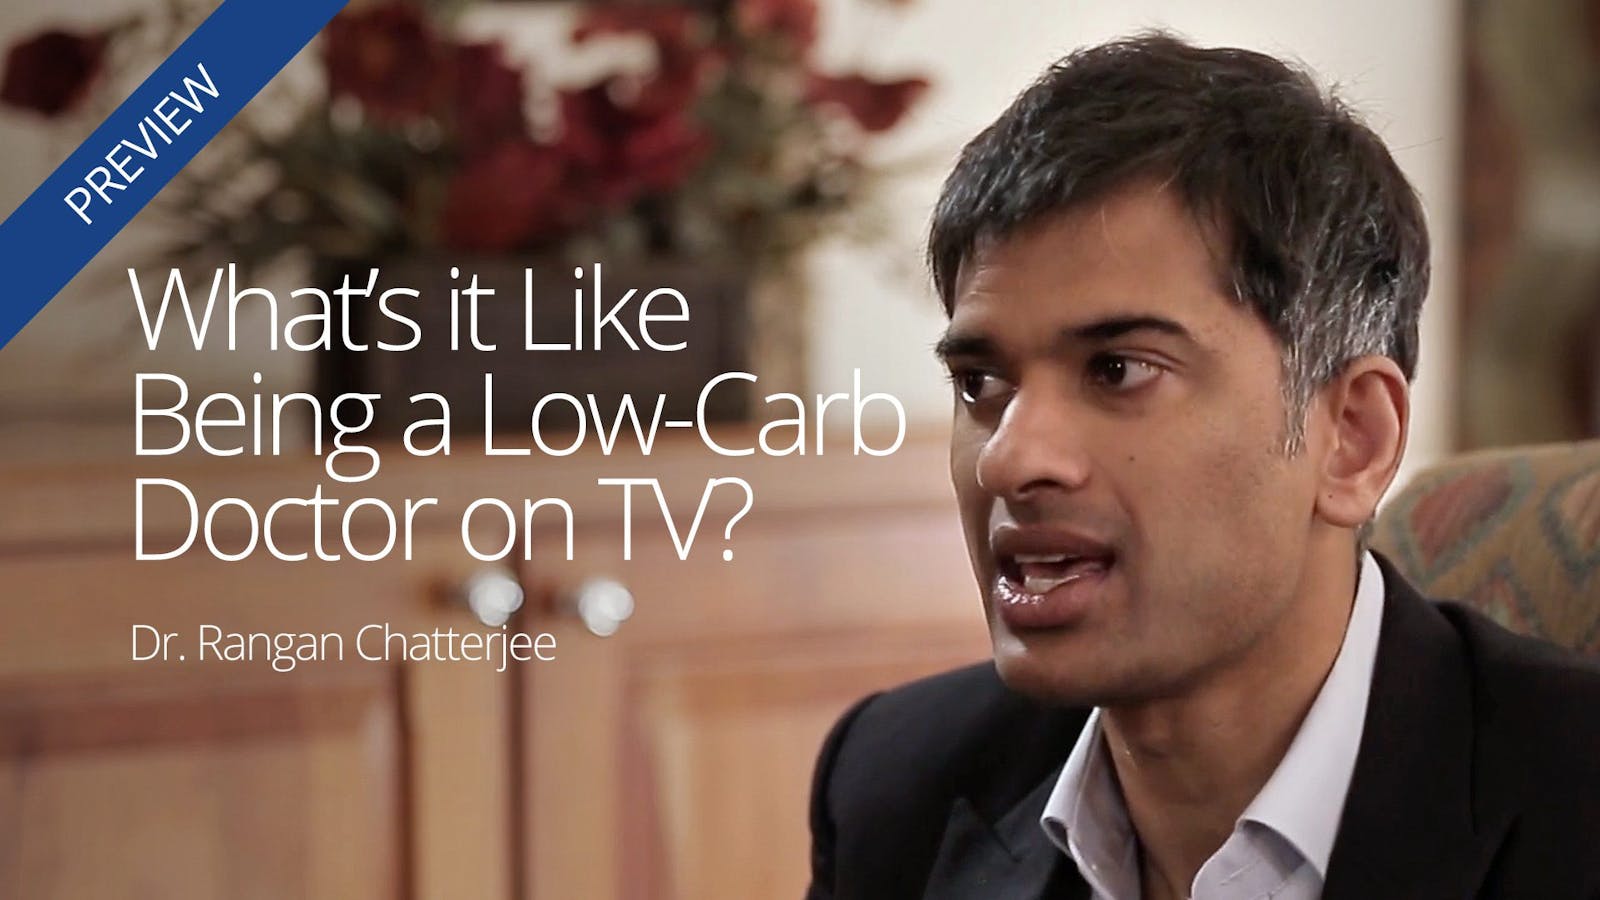 What's it like being a low-carb doctor on TV? - Diet Doctor